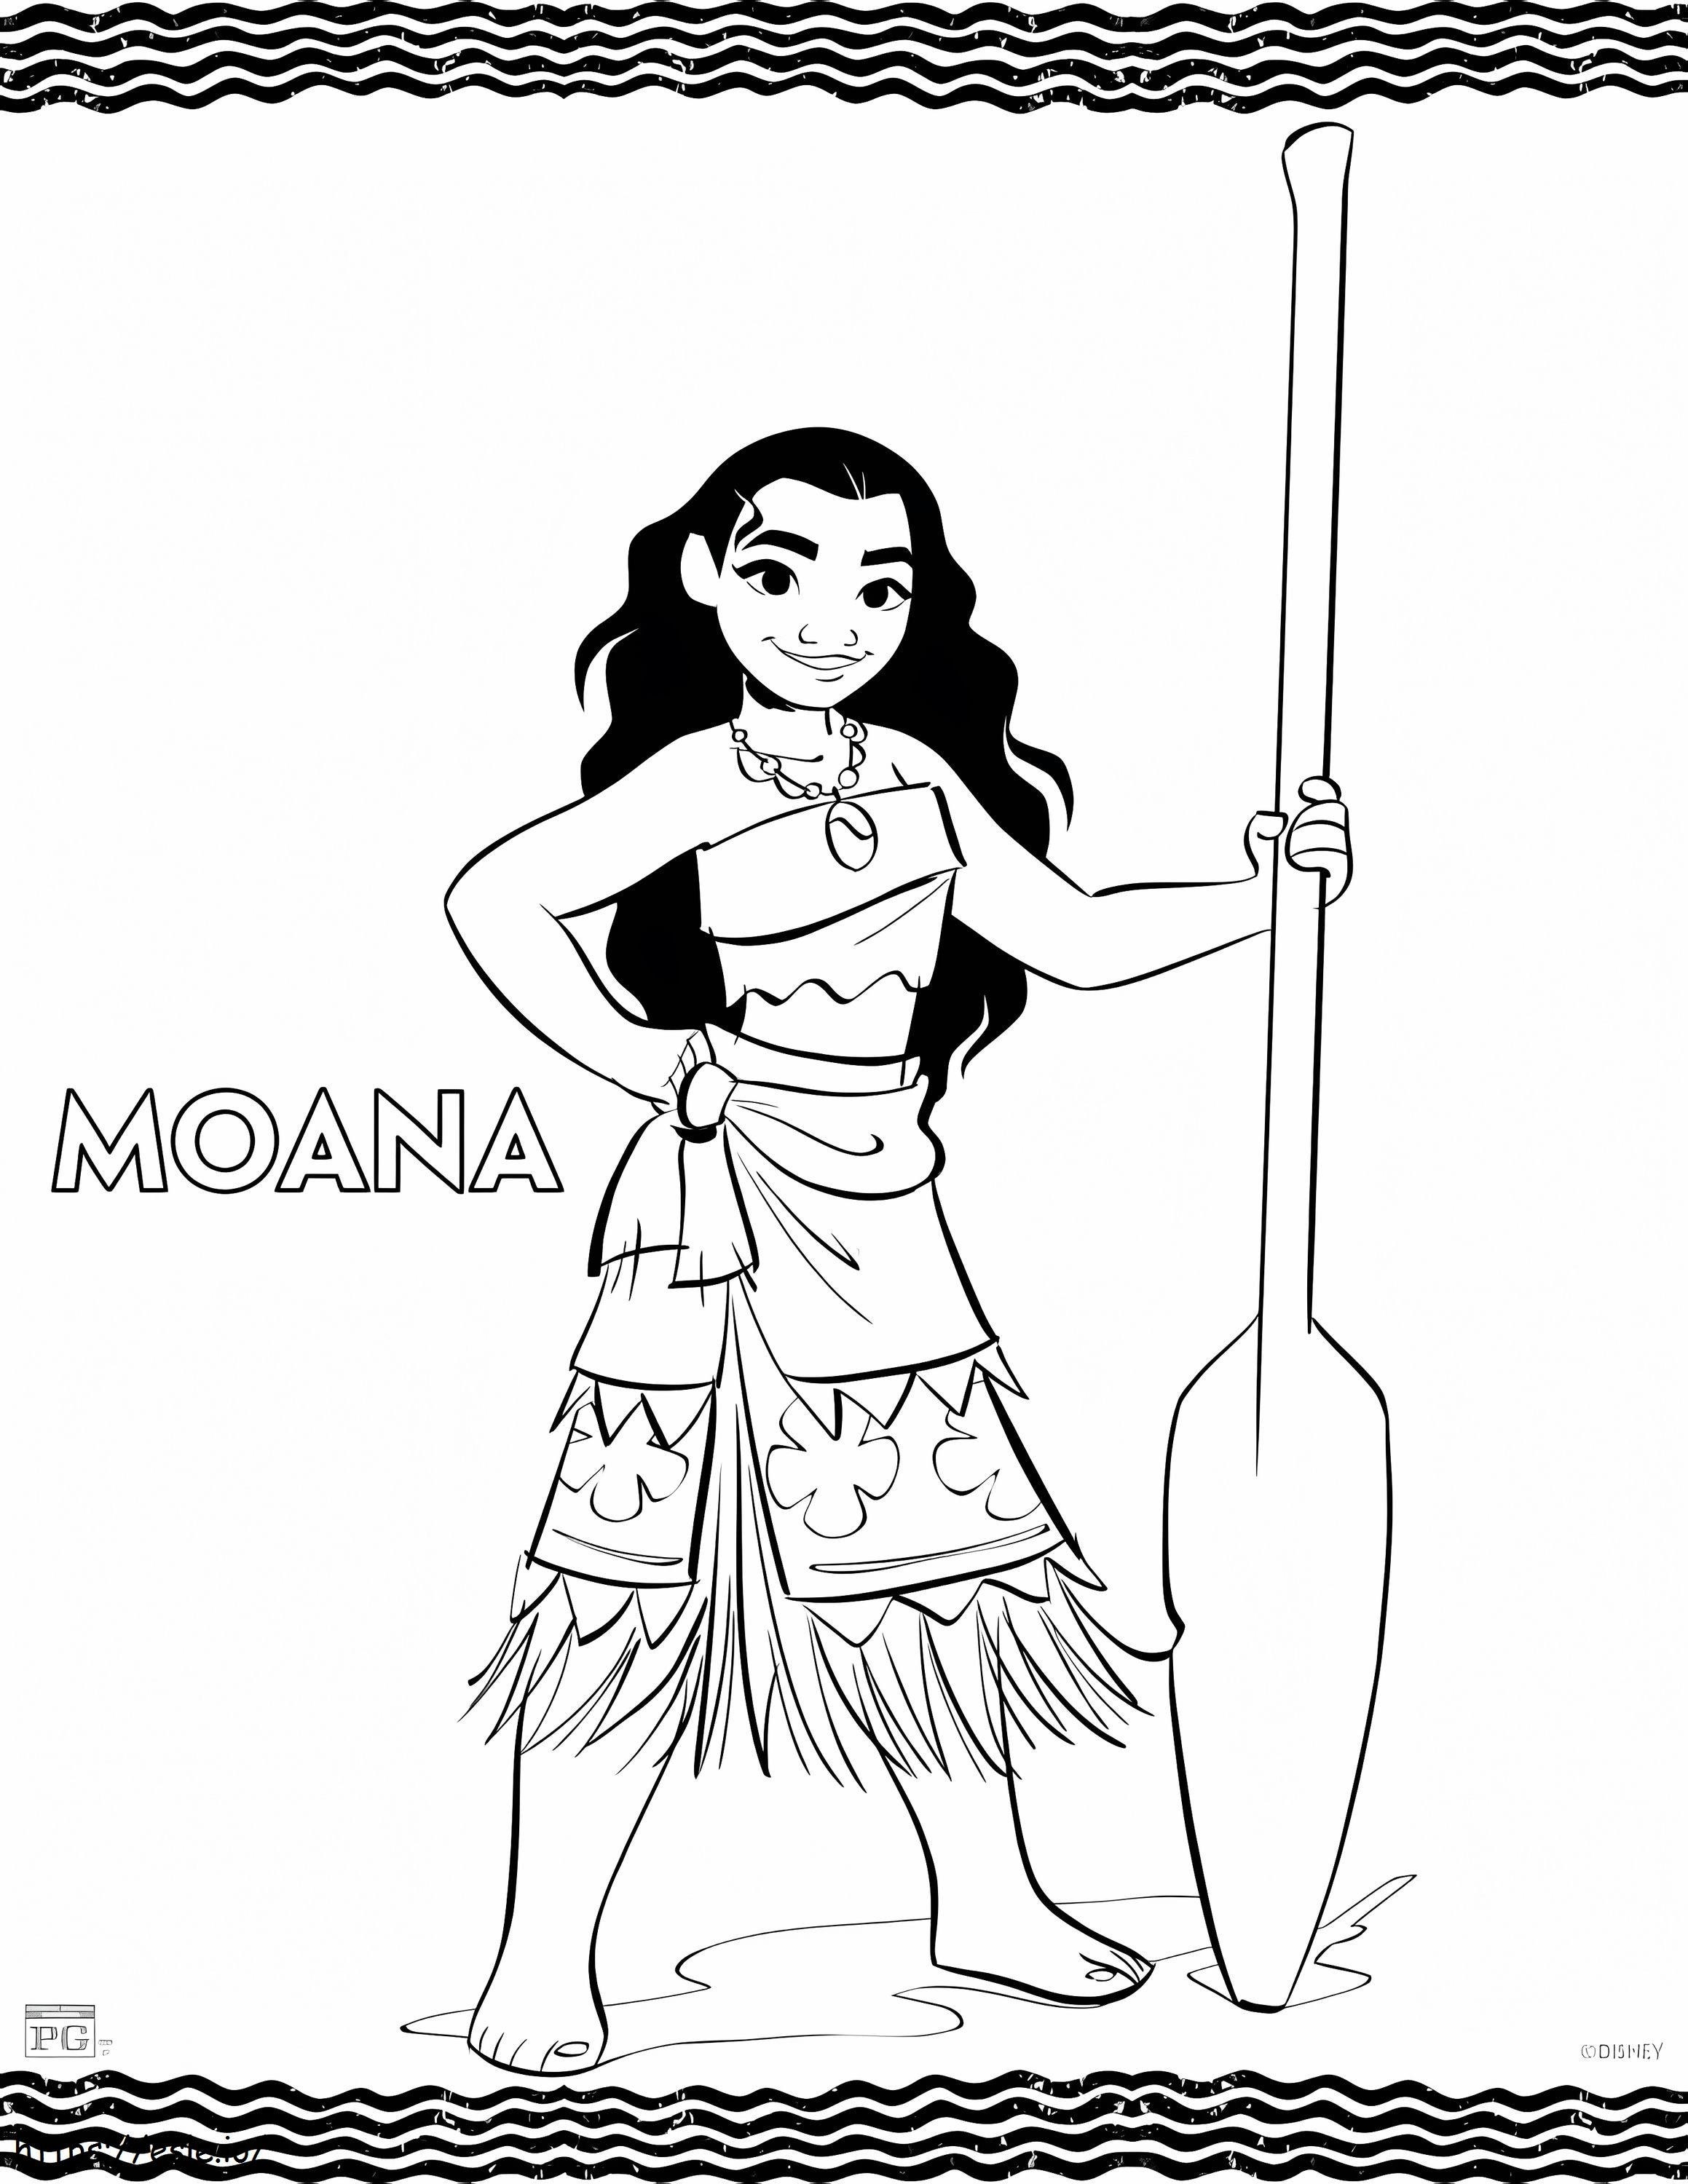 Moana Is Cool coloring page